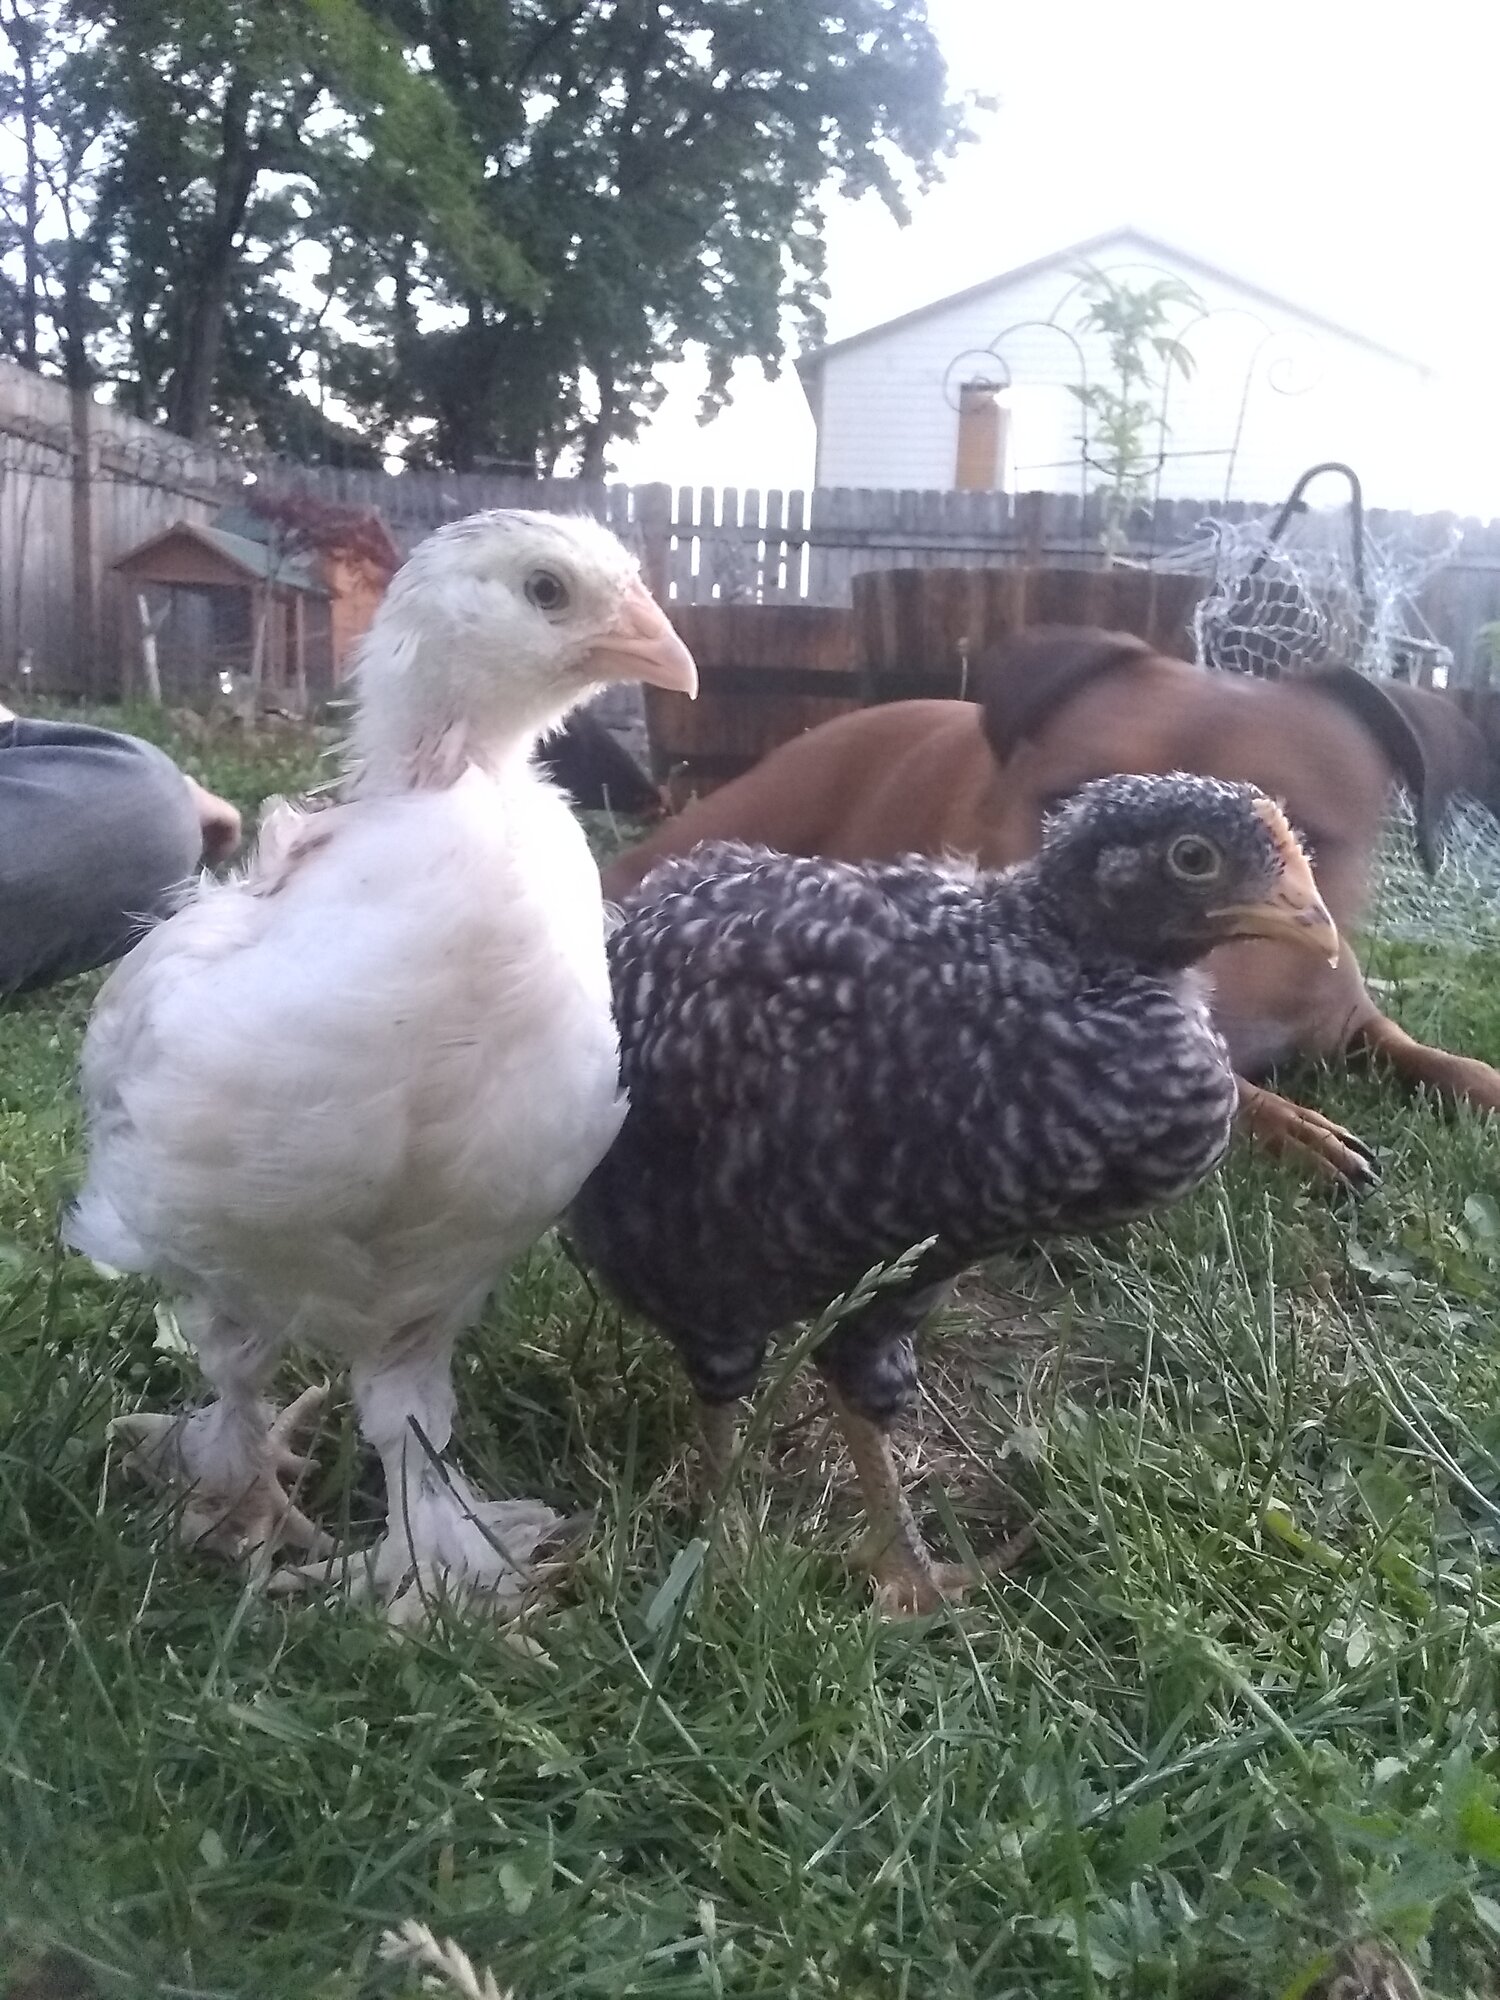 4-5 week old chicks go outside for first time